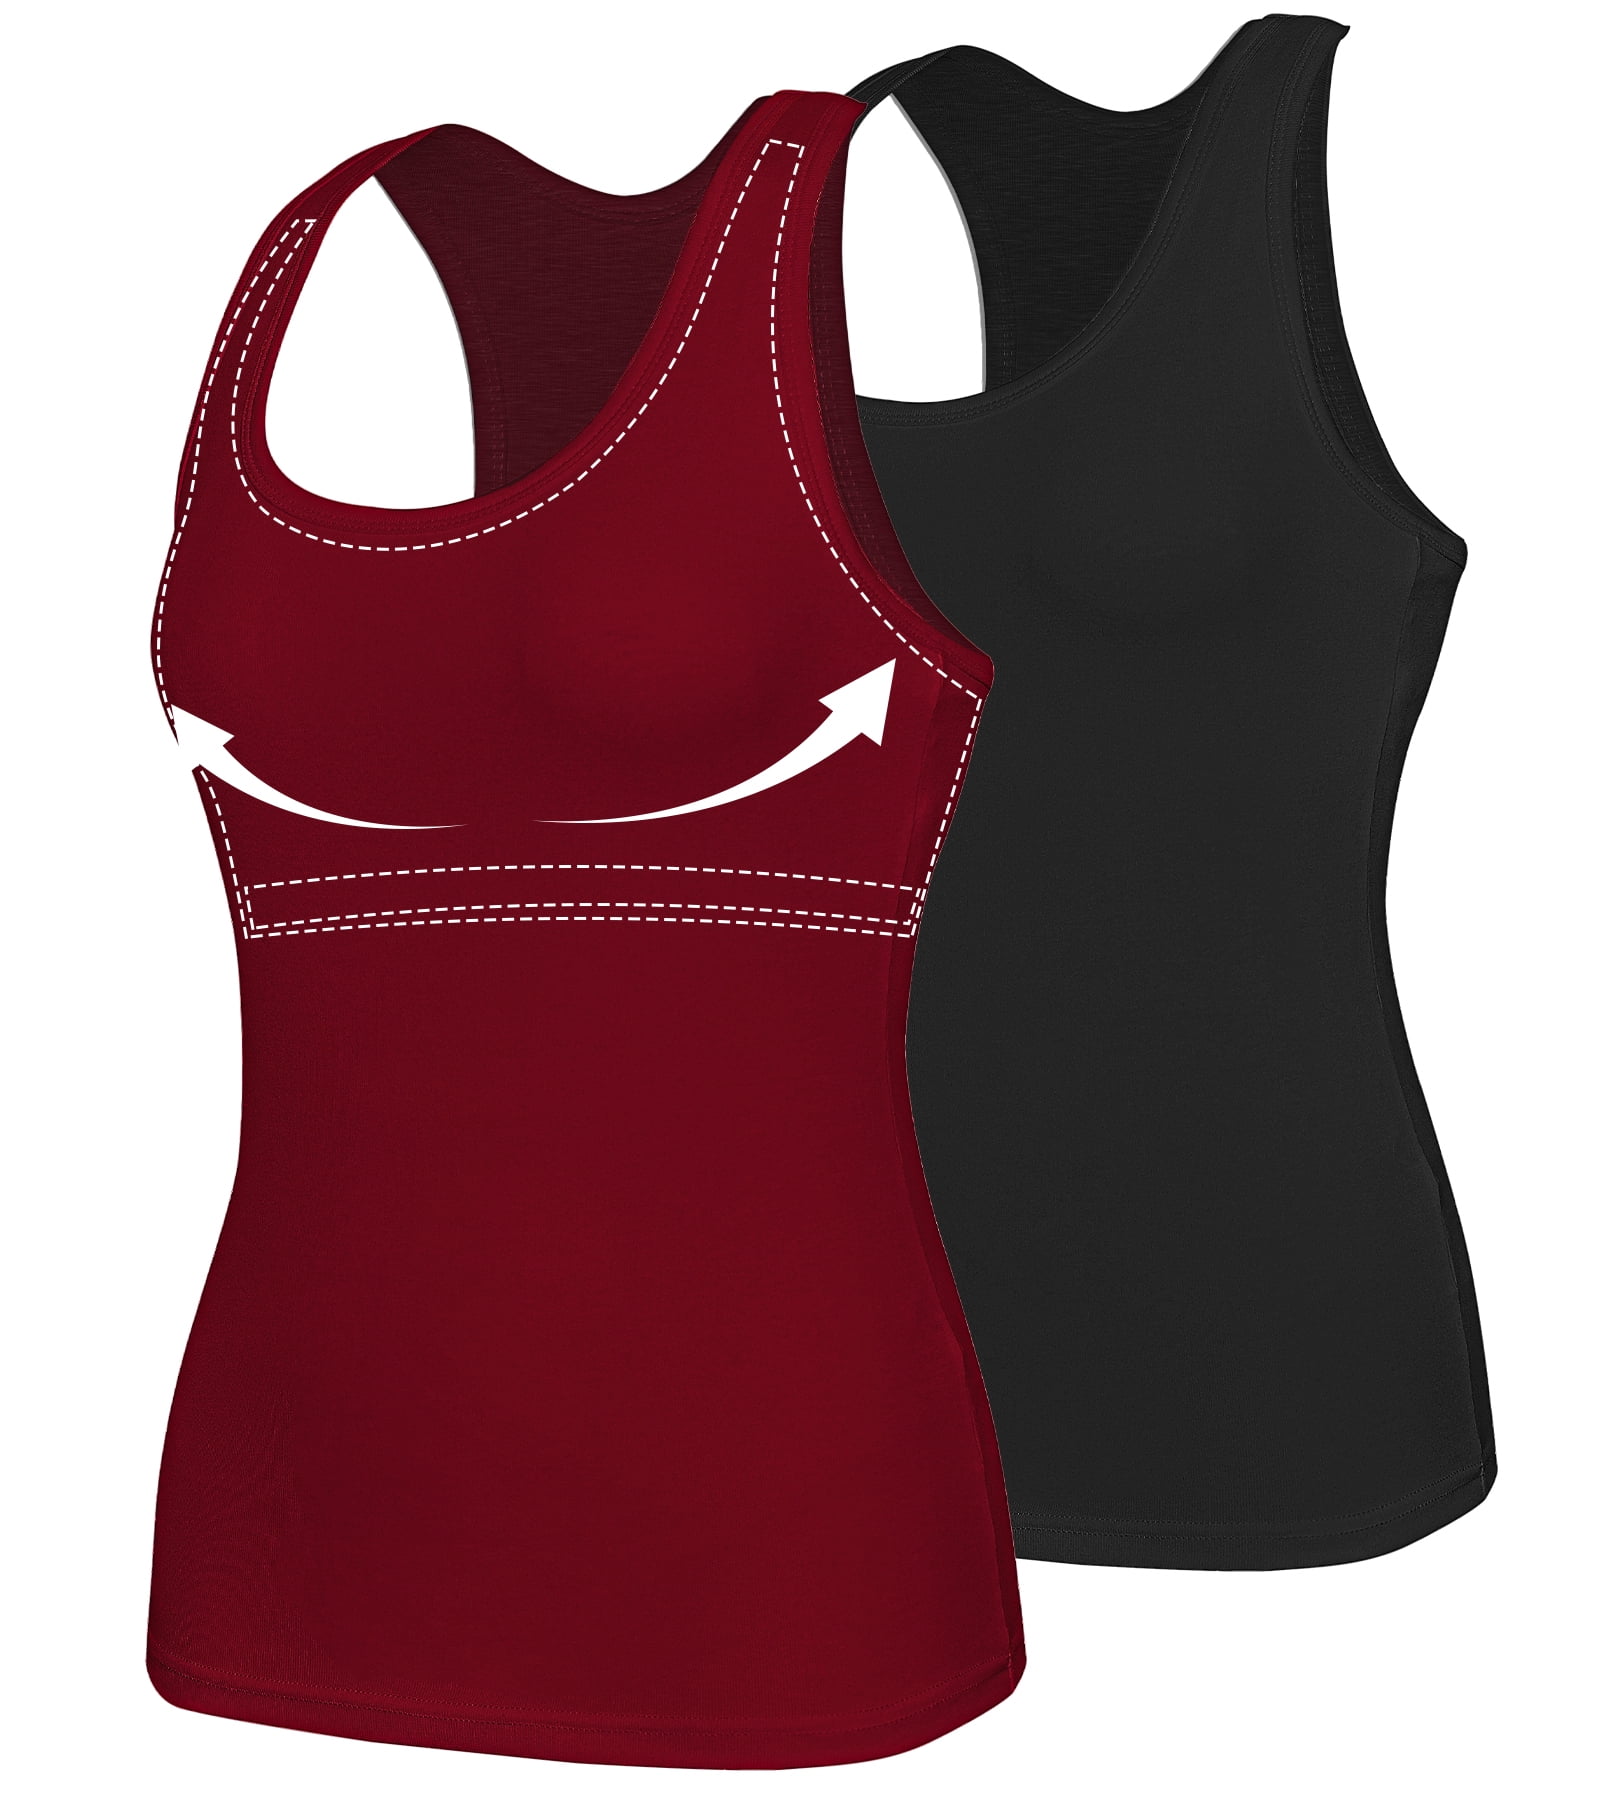 Women's Yoga Tops With Built In Bra Workout Gym Tank Tops Sports  Vest-red(s)